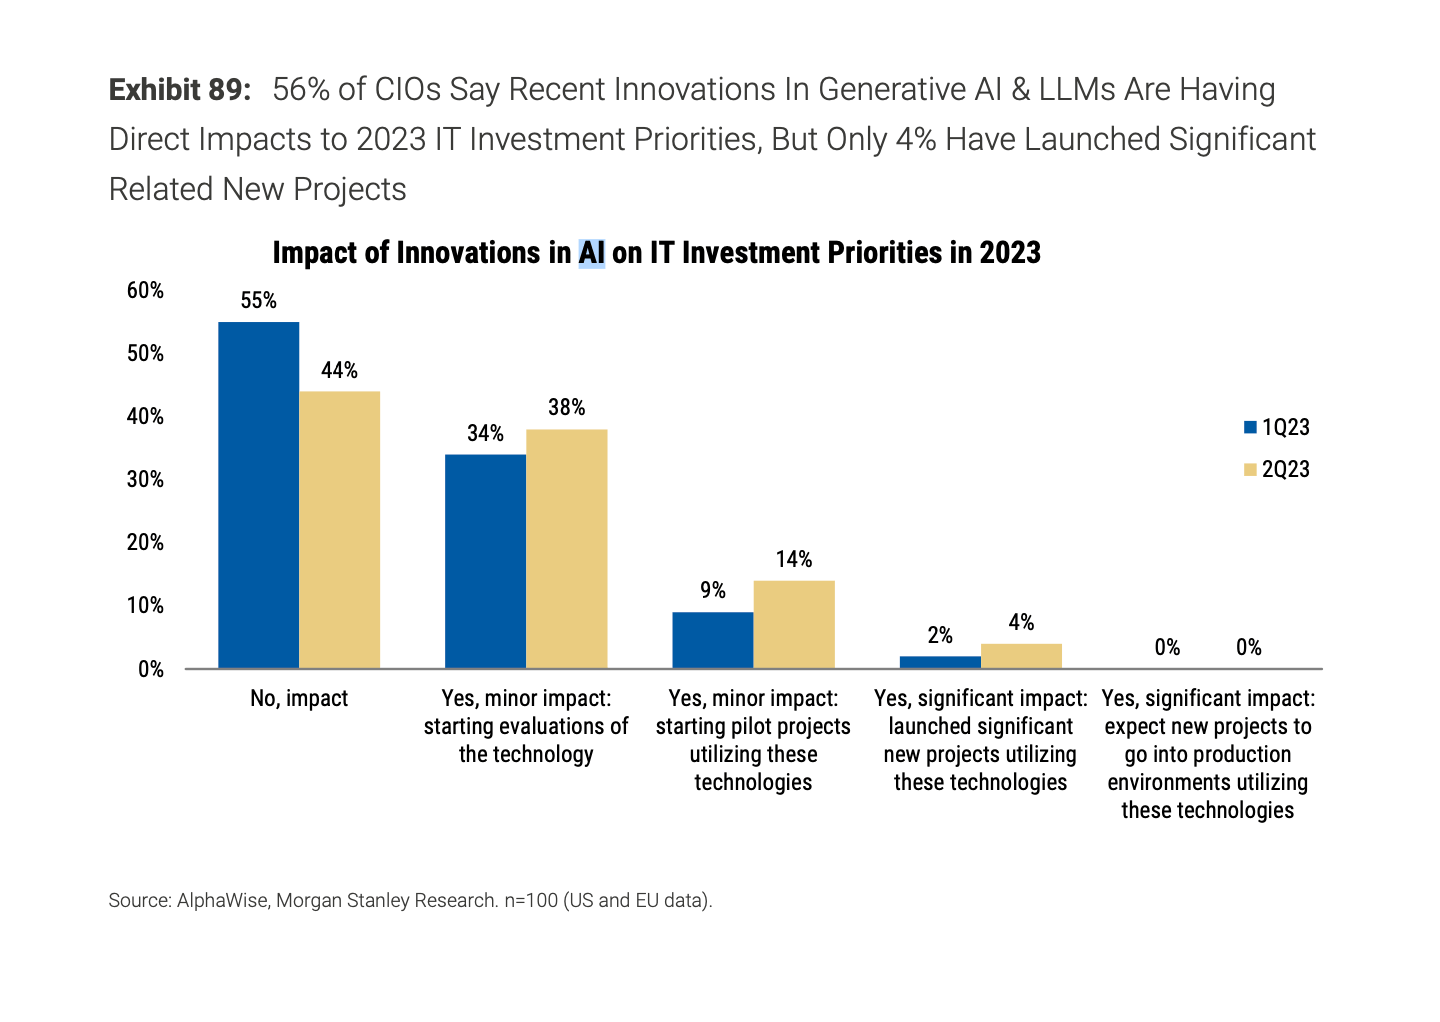 Impact of innovations in AI on IT Investment Priorities in 2023